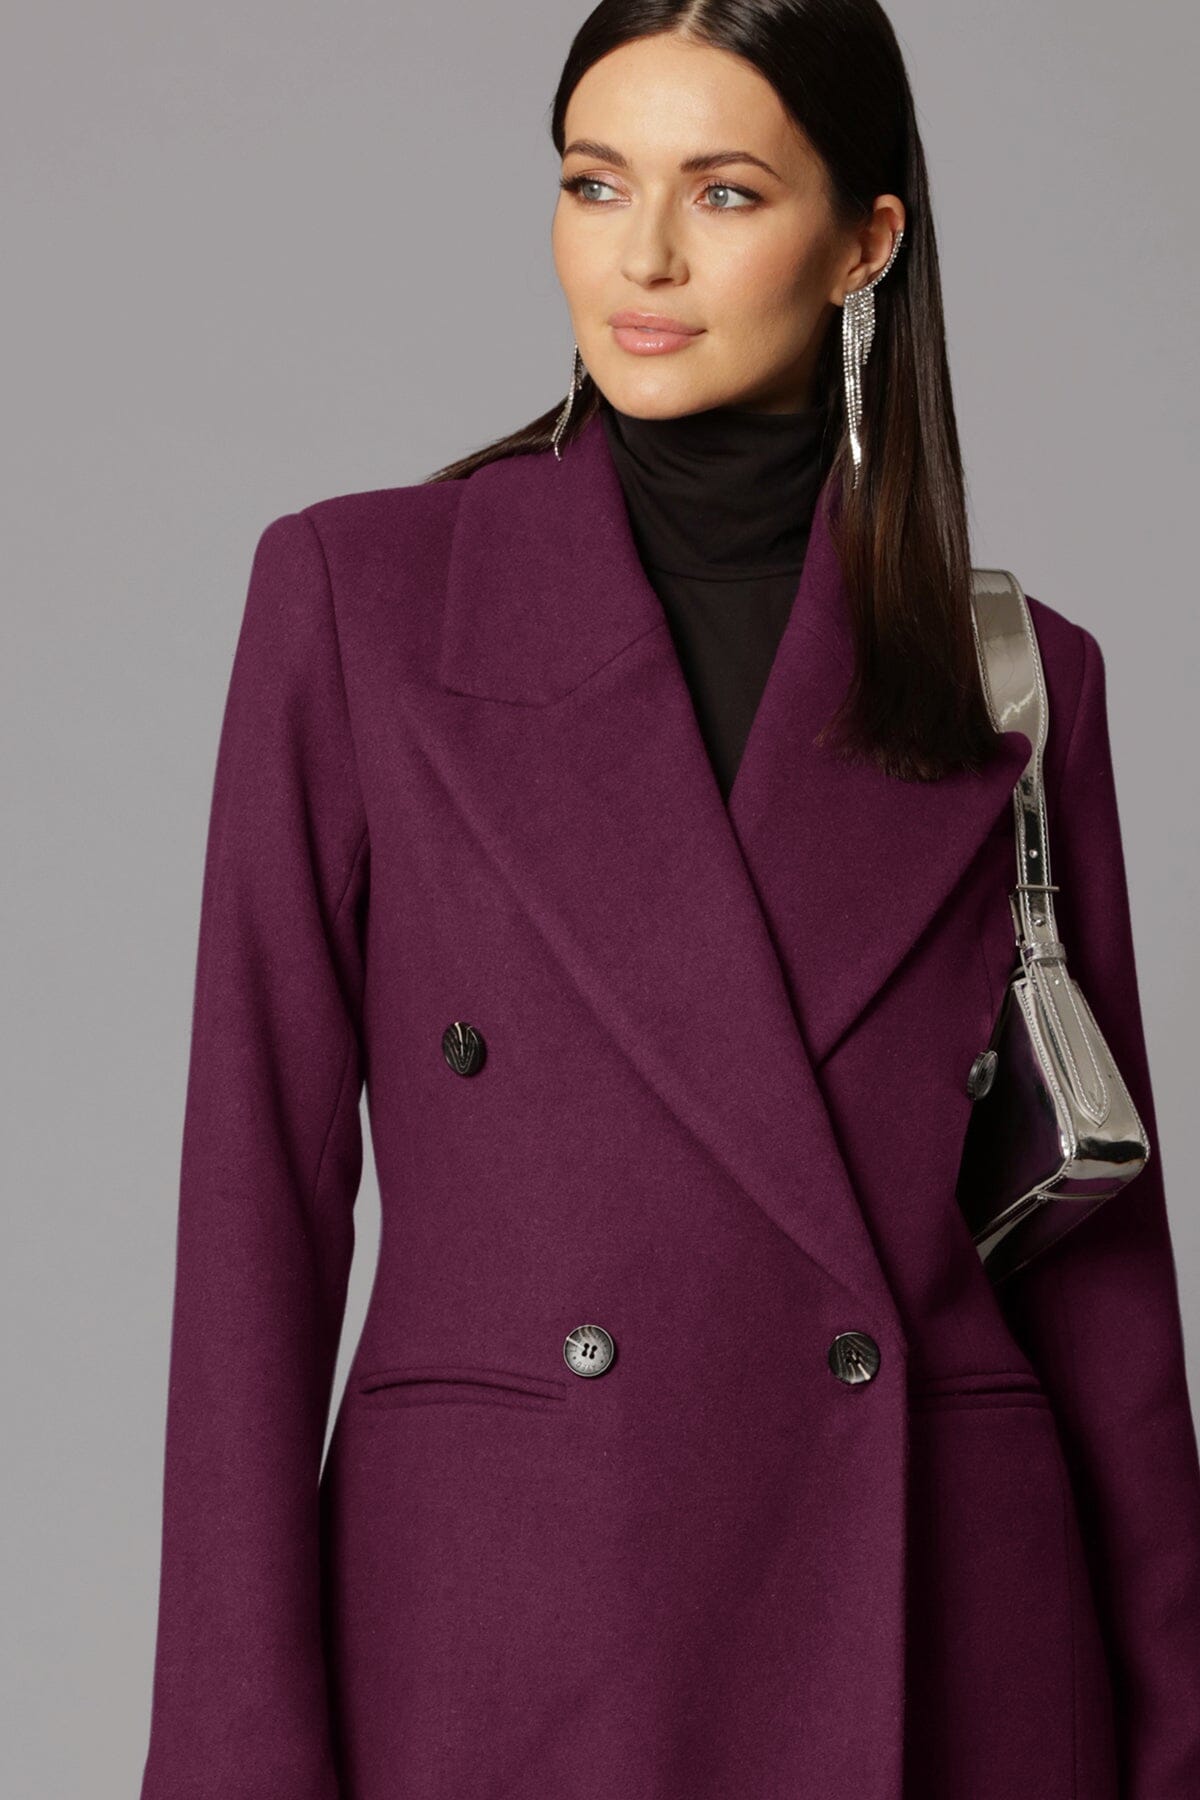 Dressy aubergine purple tailored double-breasted long coat by Avec Les Filles Coats & Jackets